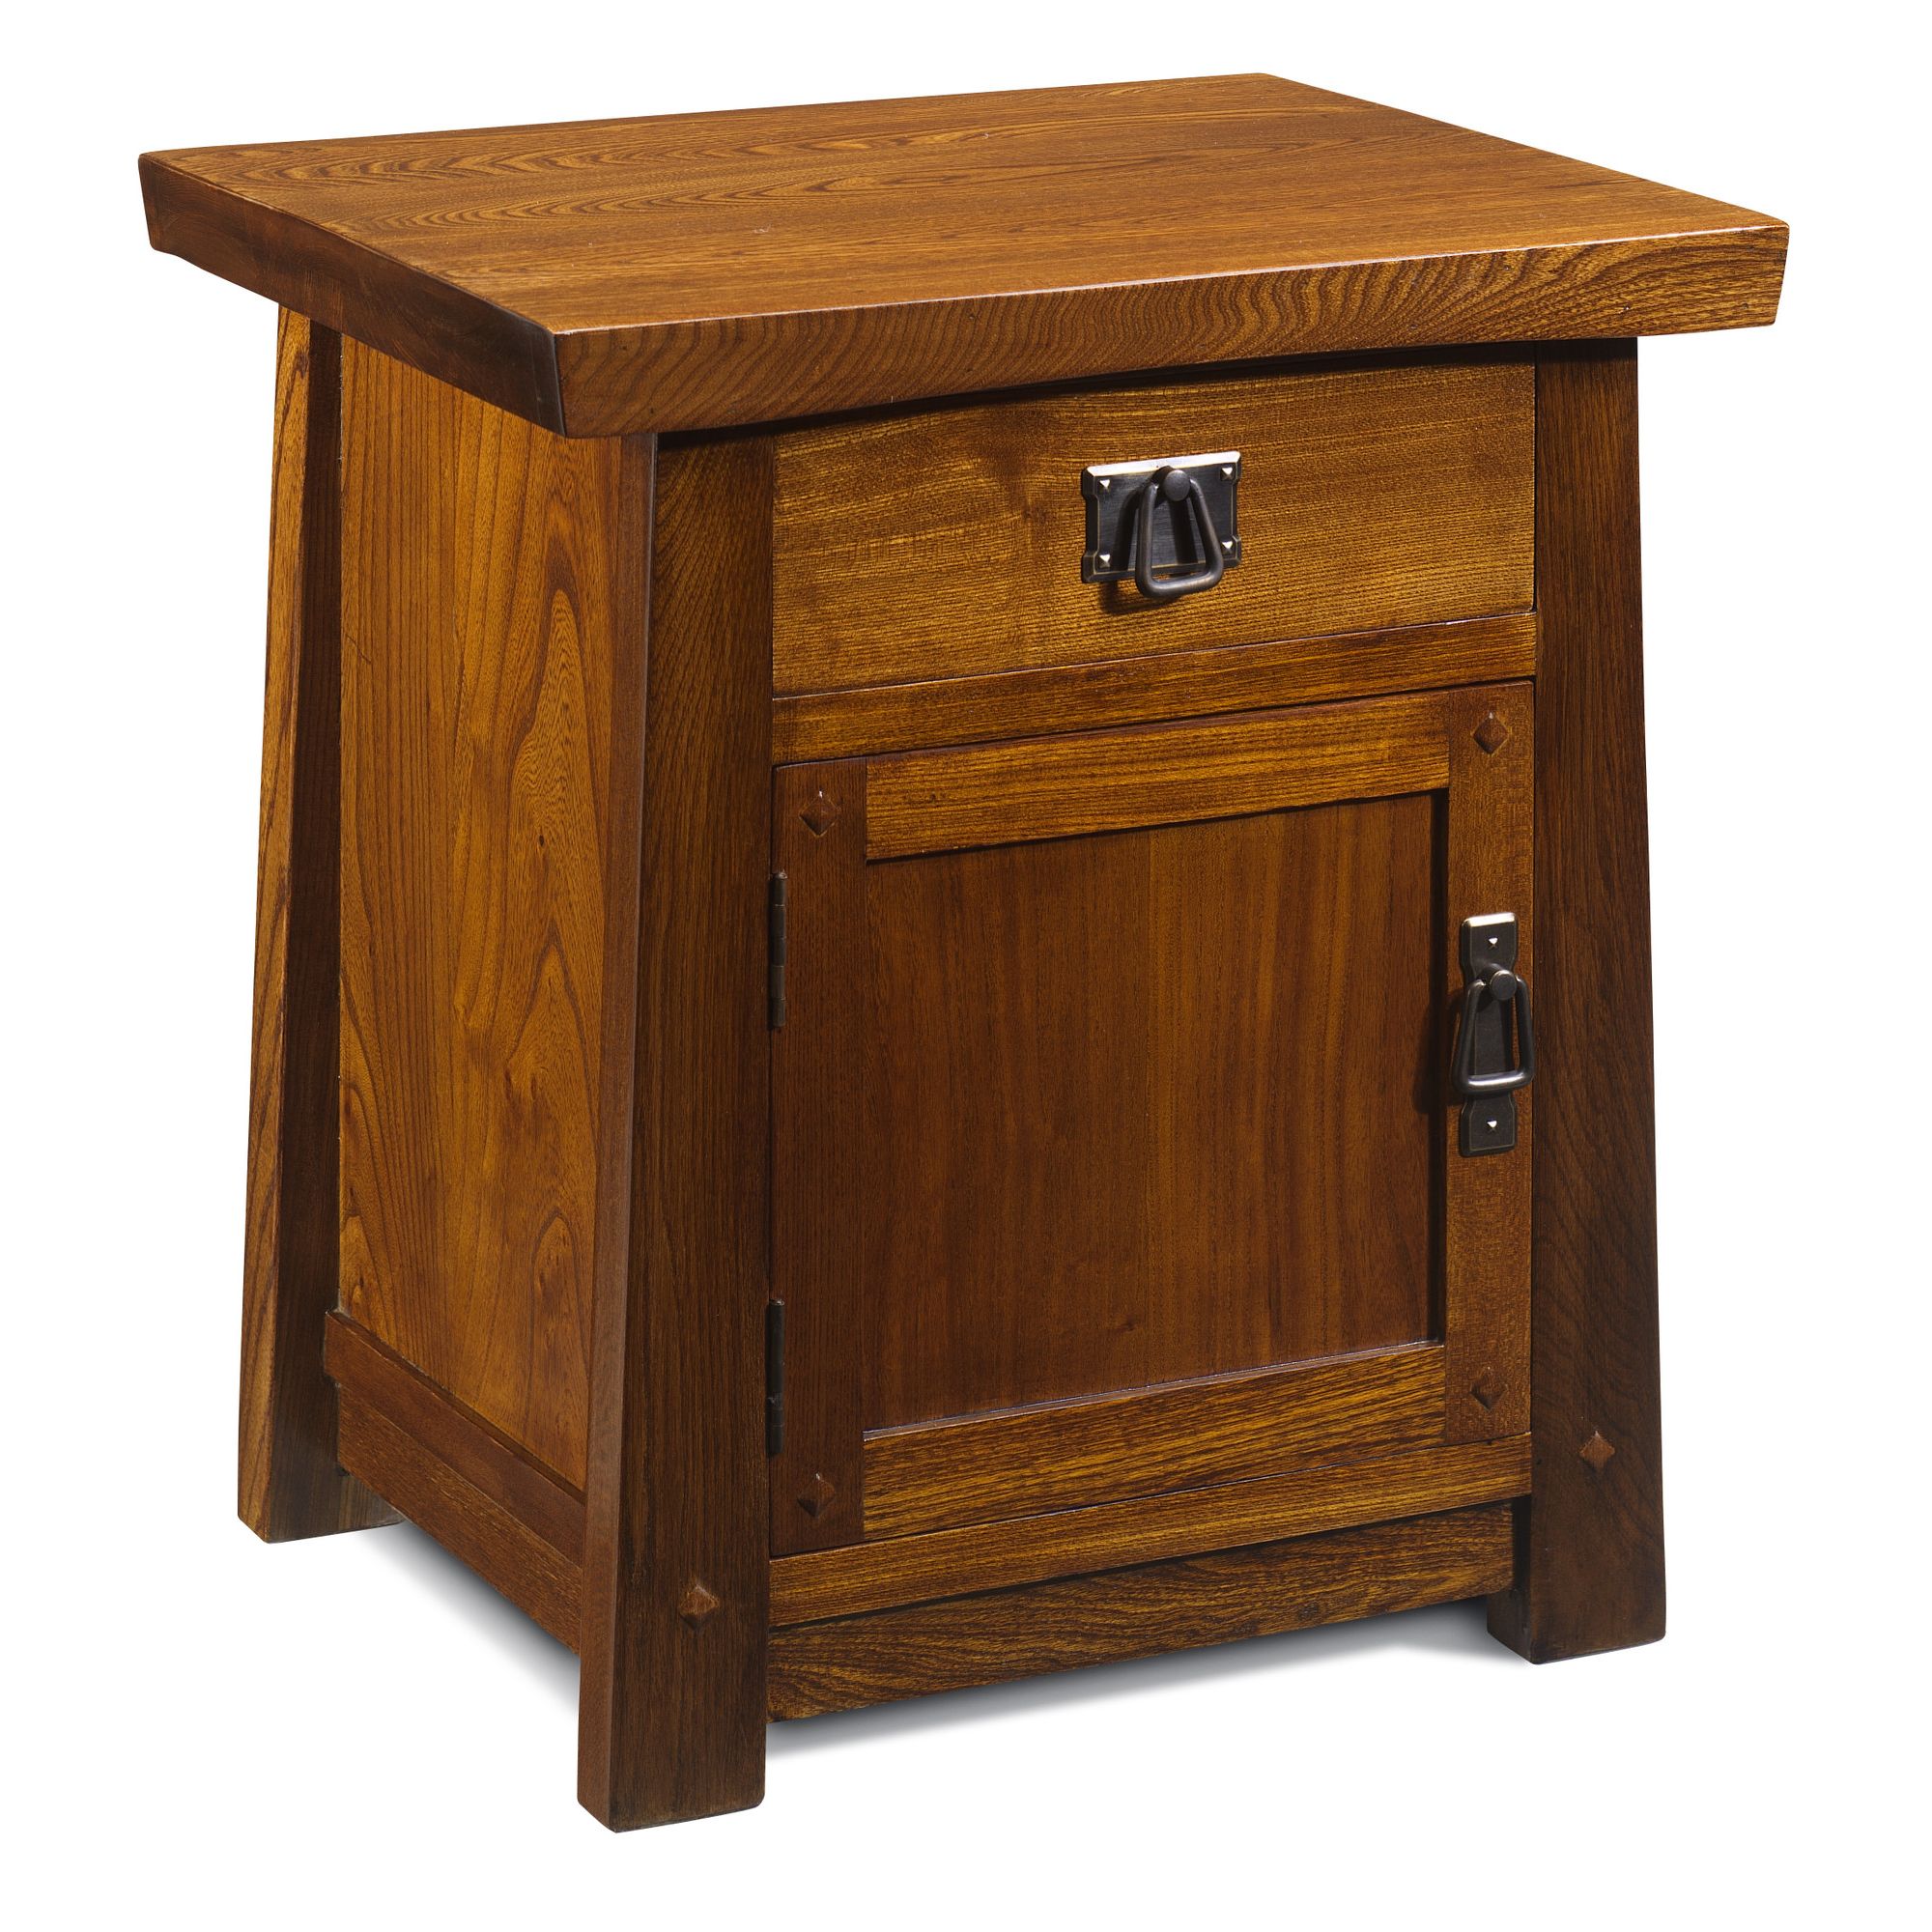 Shimu Asian Contemporary Bedside Cabinet at Tesco Direct